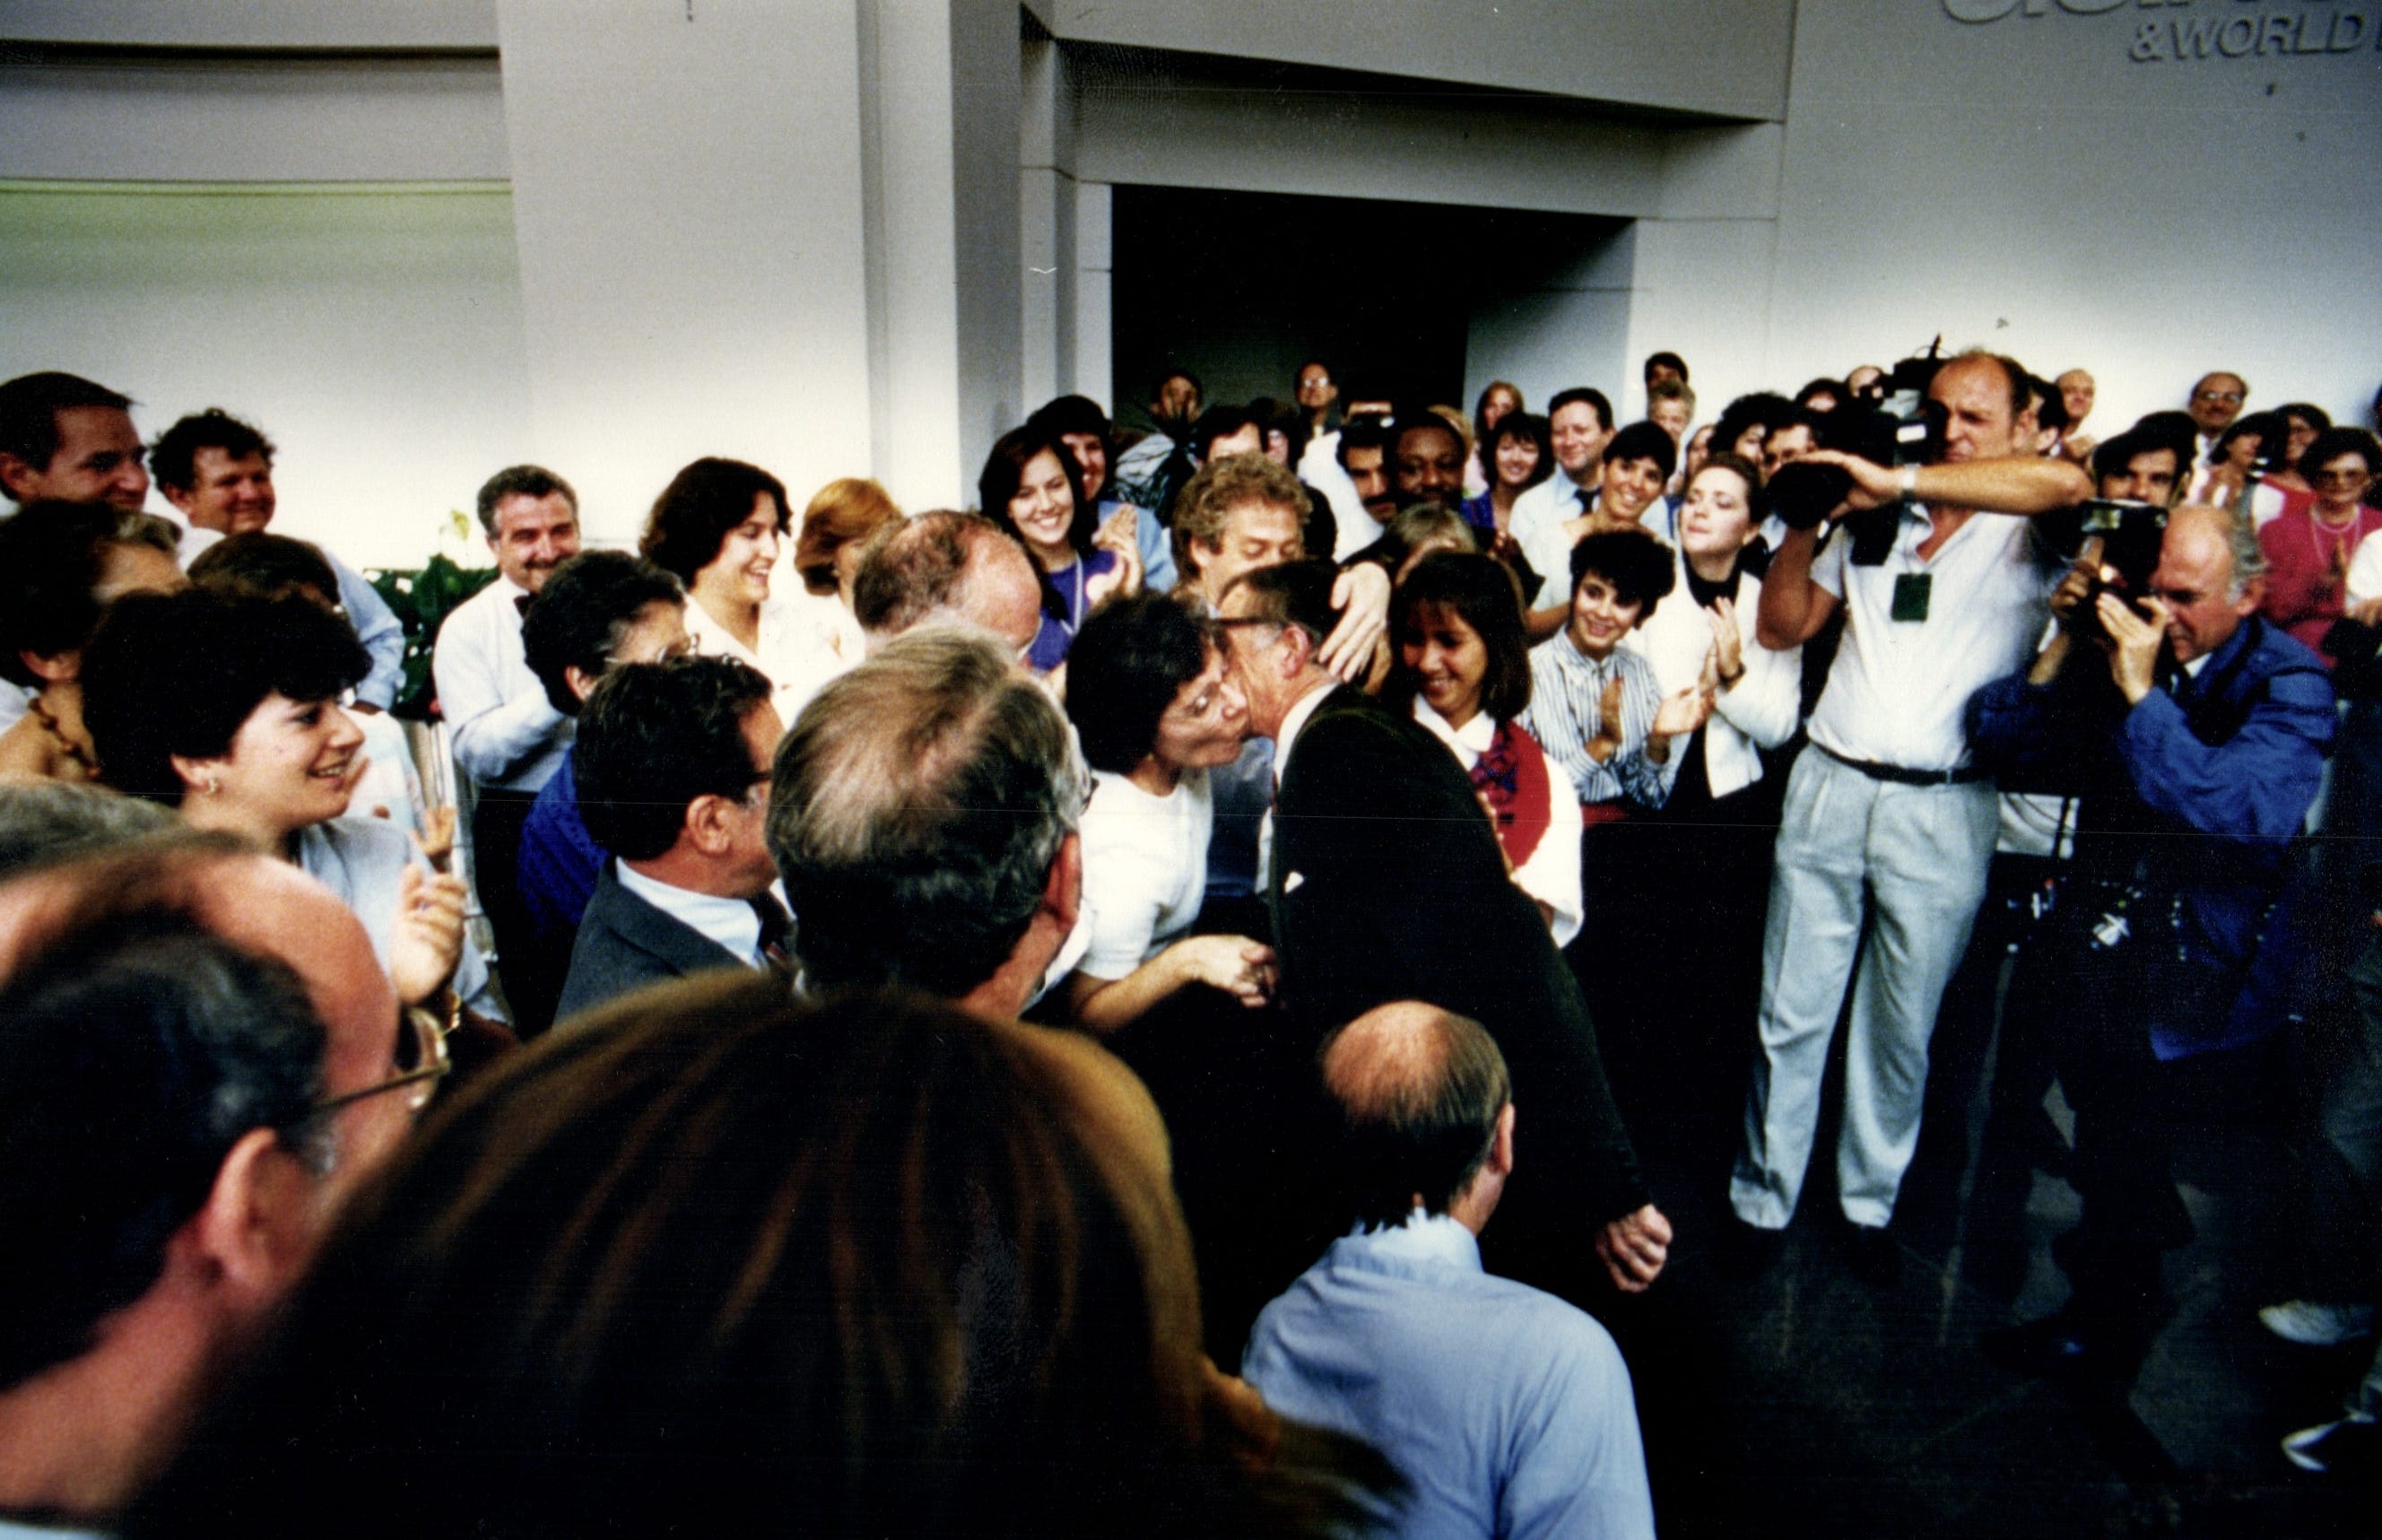 Journalist Nicholas Daniloff is welcomed home to Washington on Wednesday, Oct. 1, 1986, by fellow U.S. News & World Report employees after he was imprisoned and accused of spying in the Soviet Union.